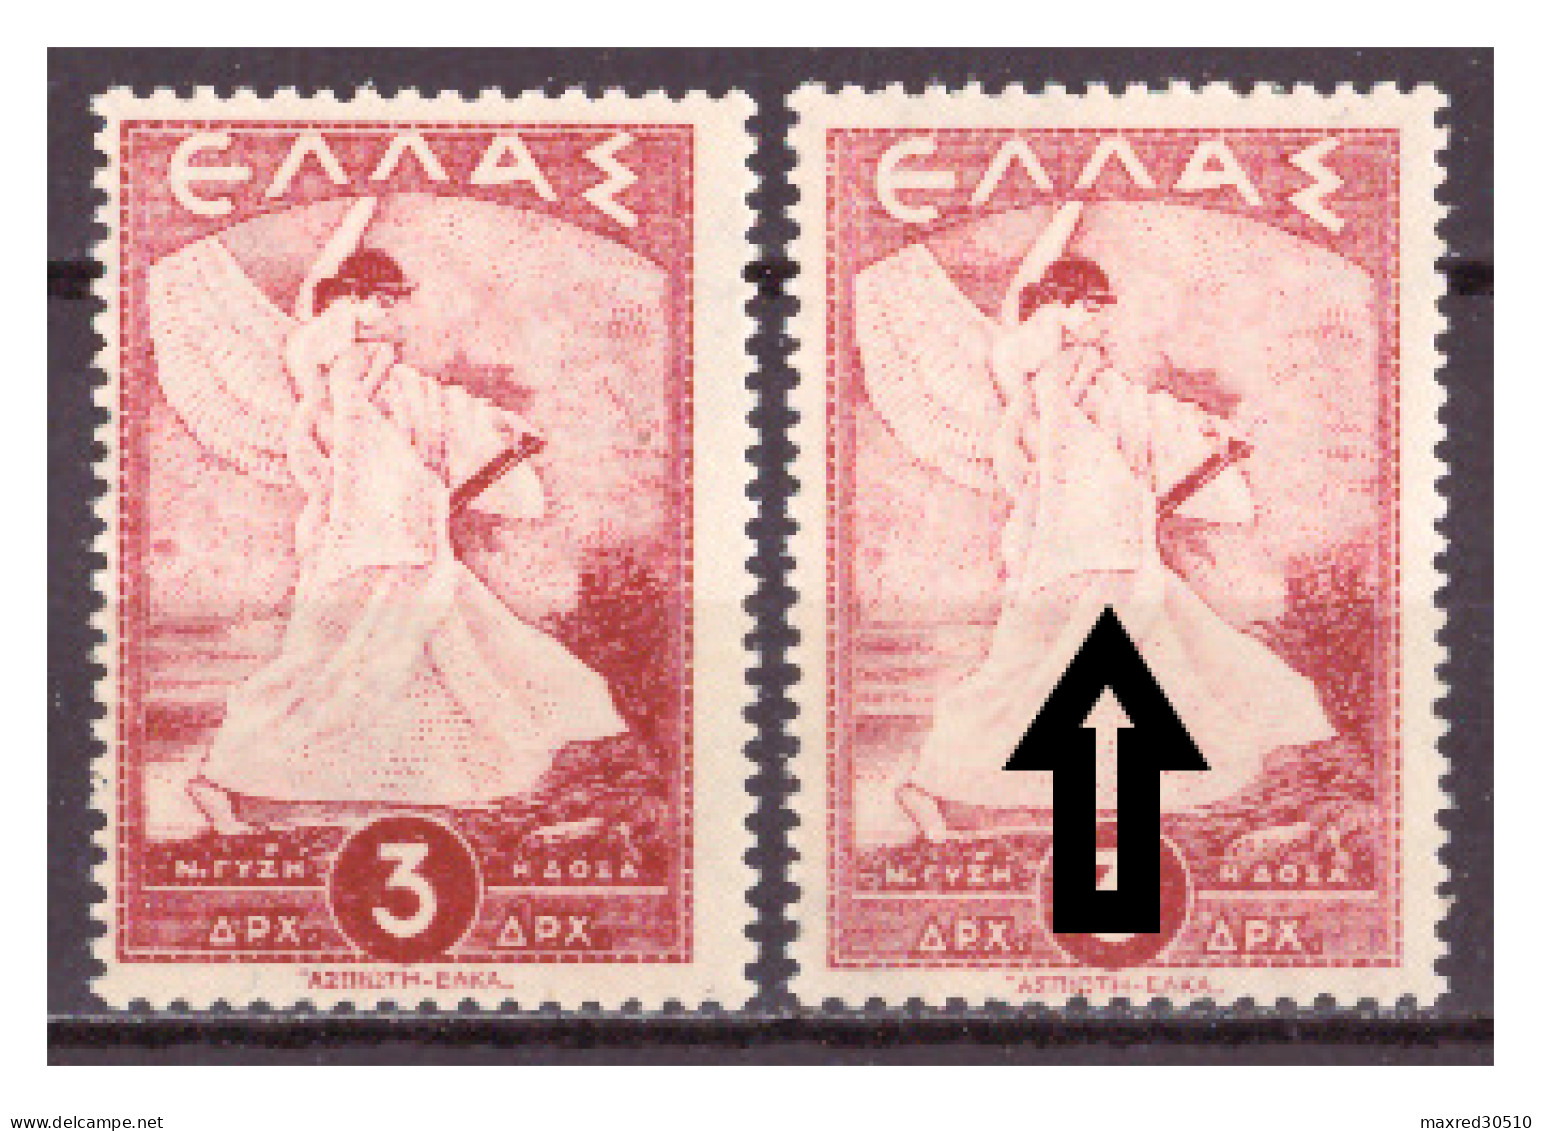 GREECE 1945 2X3L. OF THE "GLORY ISSUE" THE 2ND ONE (SEE ARROWS) WITH MIRROR PRINTING AT THE GUM ERROR MNH - Variedades Y Curiosidades